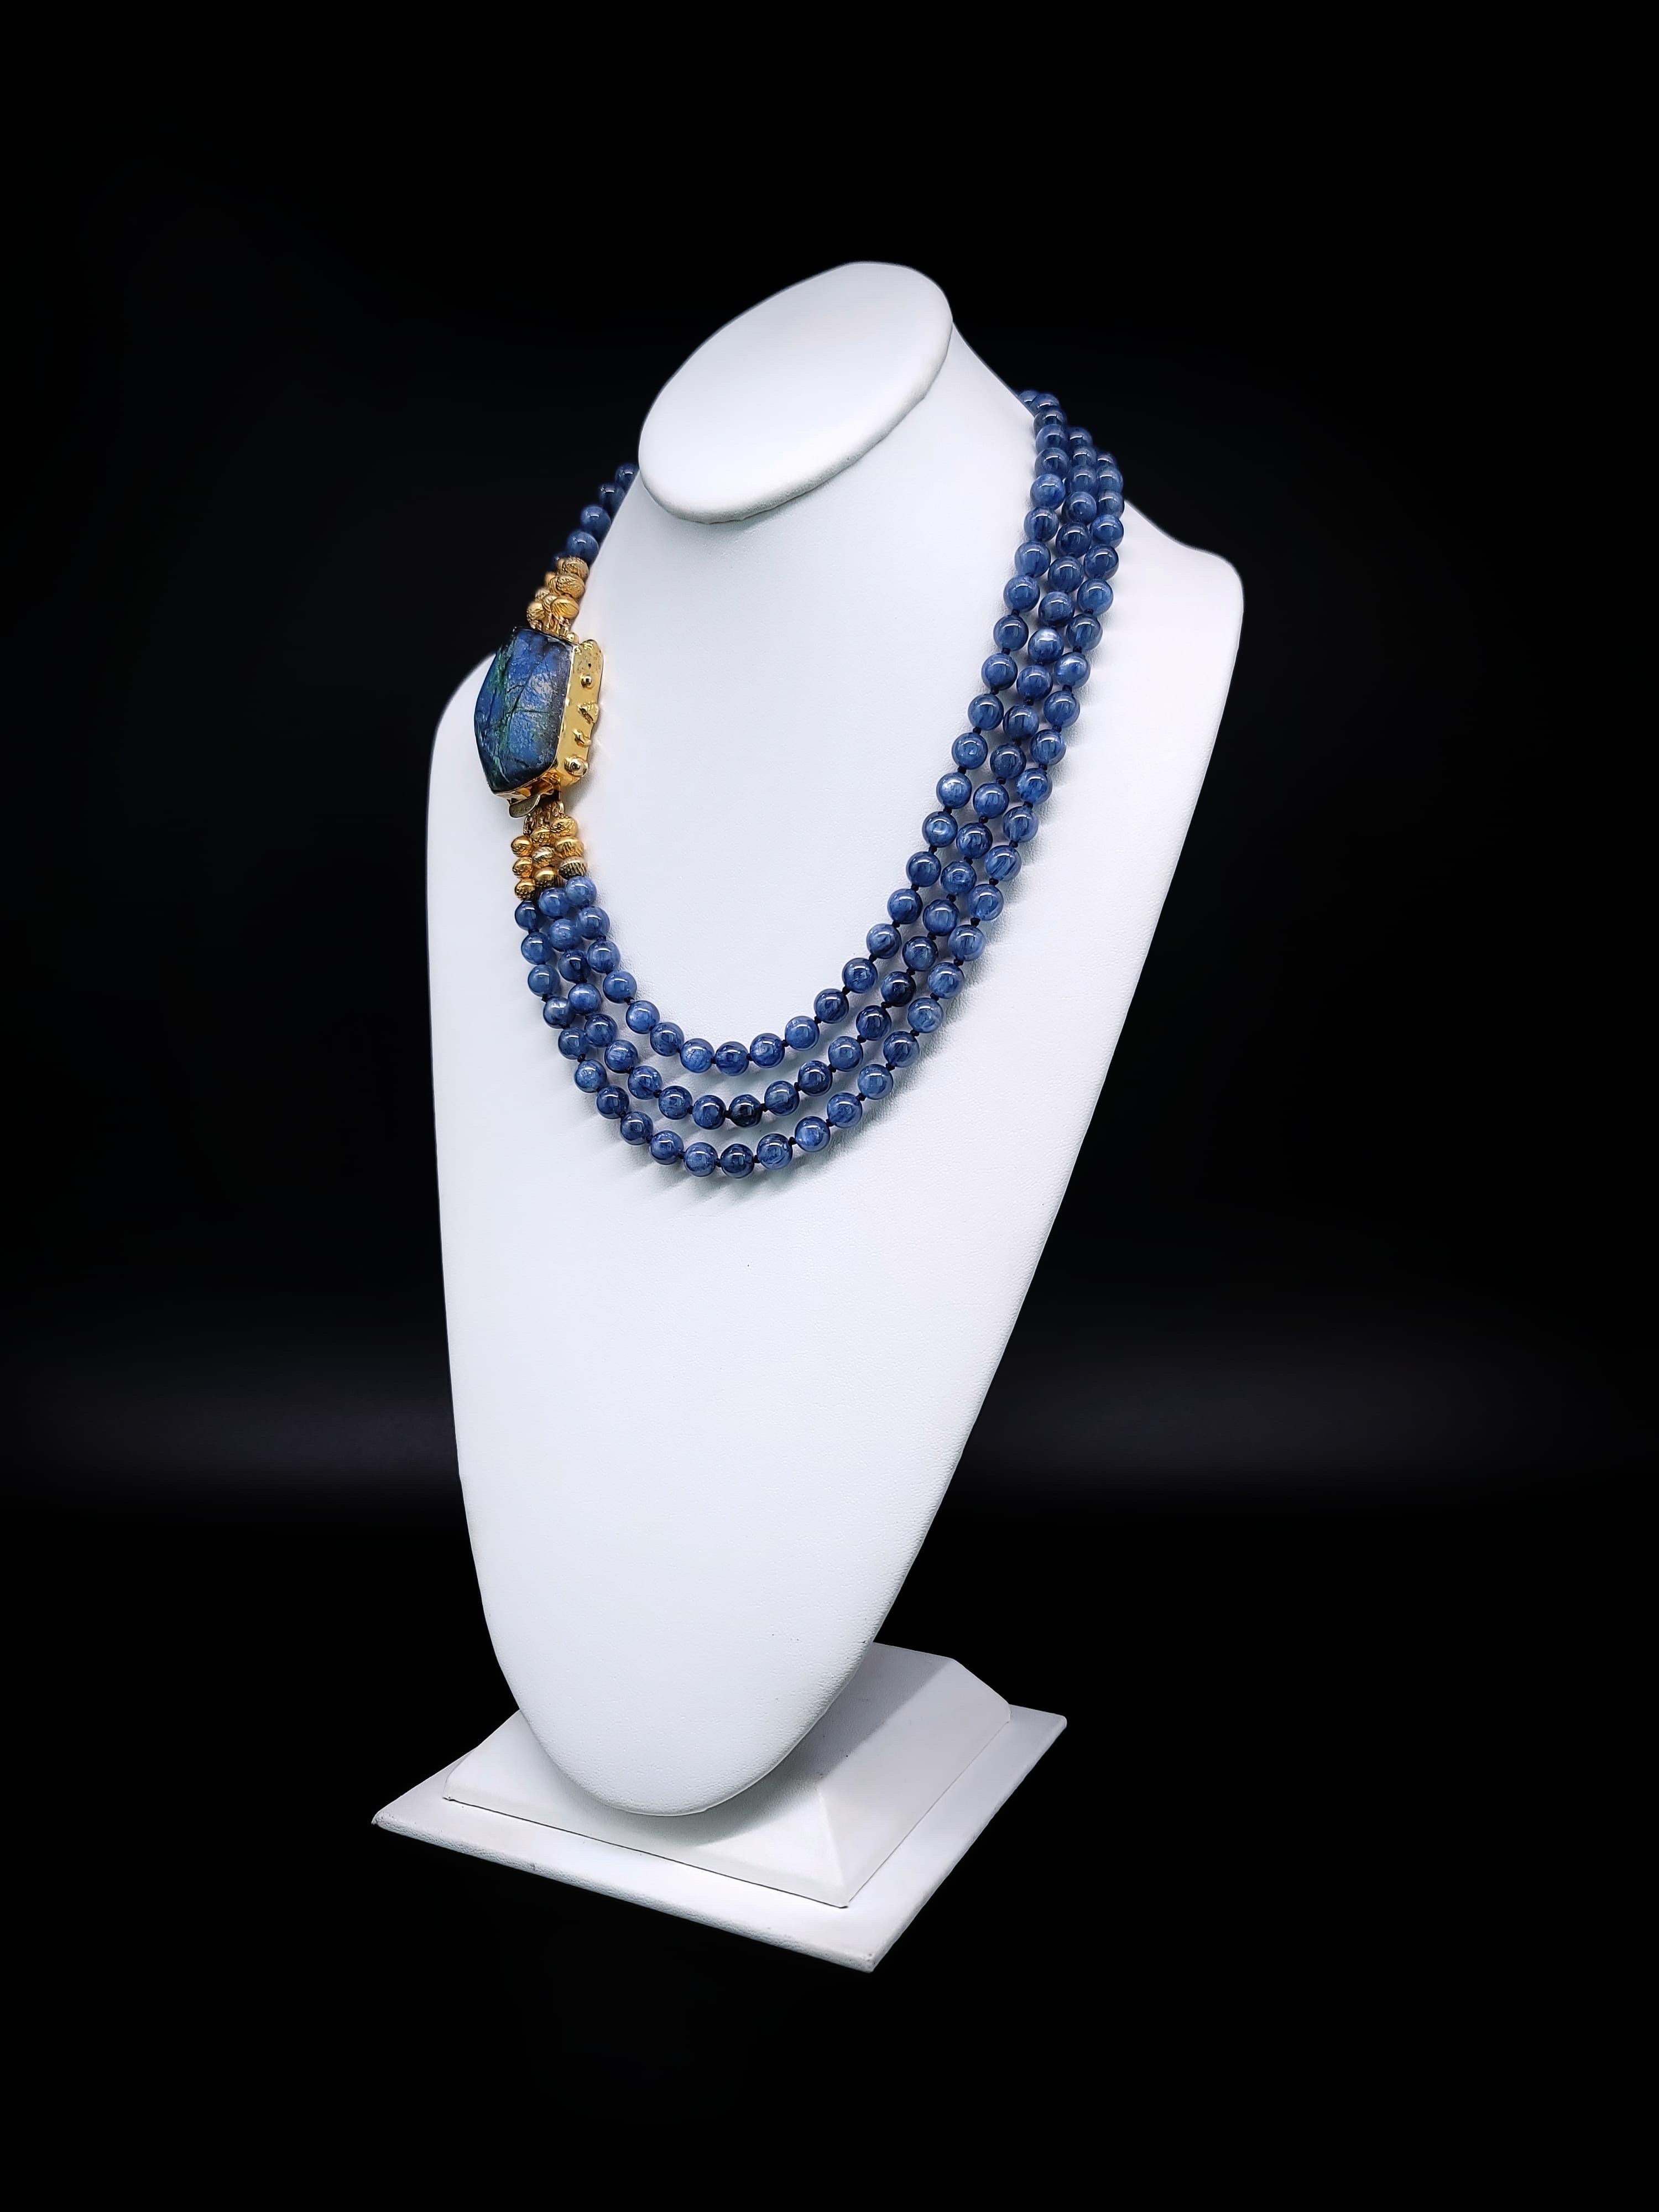 Elevate your jewelry collection with a truly exceptional piece - our one-of-a-kind necklace featuring three strands of exquisitely matched 8 mm rich blue Kyanite beads. Each bead is a testament to nature's artistry, showcasing the captivating allure